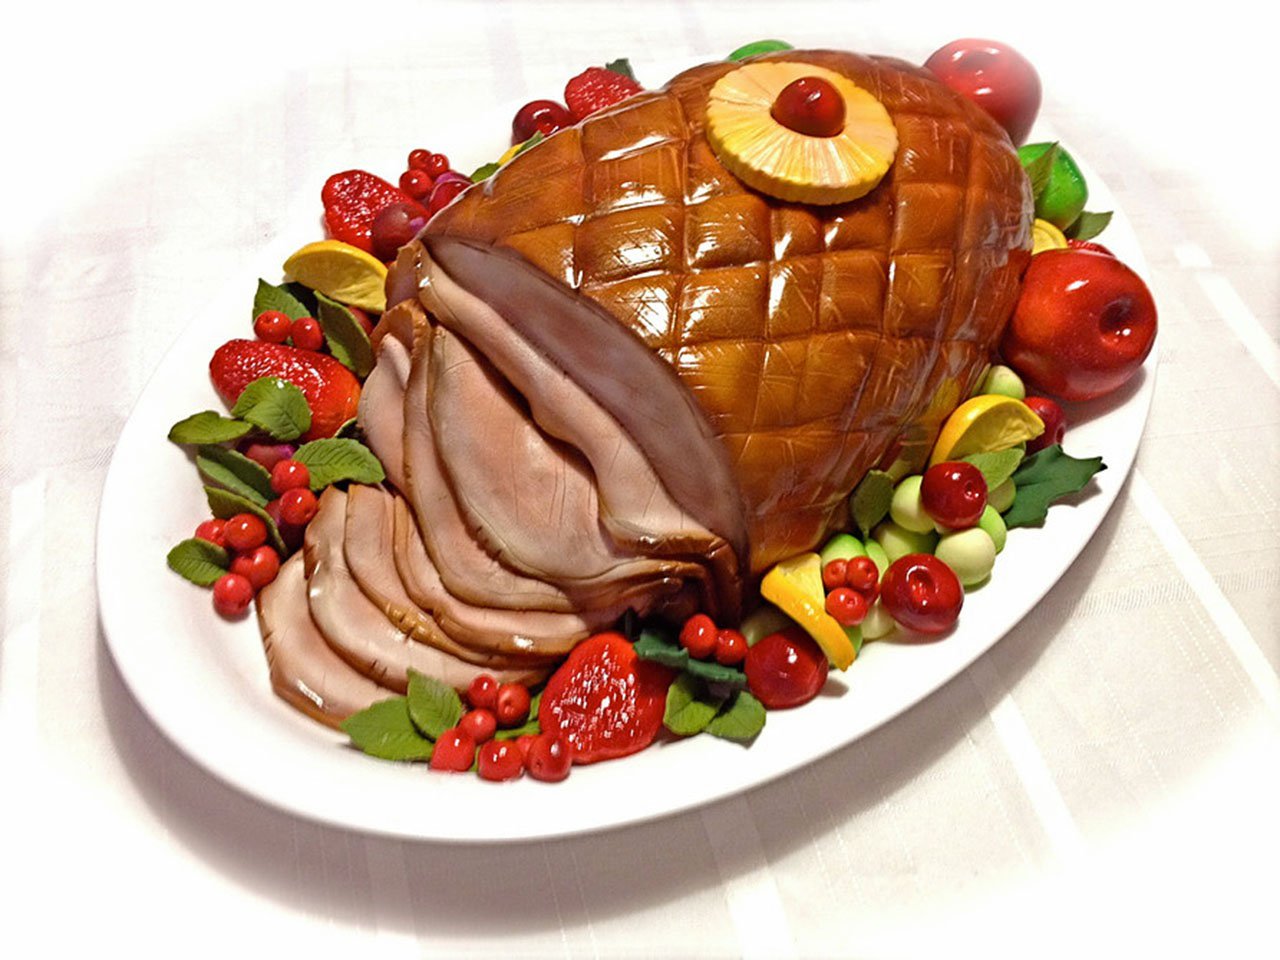 Cakes that look like other foods. This one is a ham.